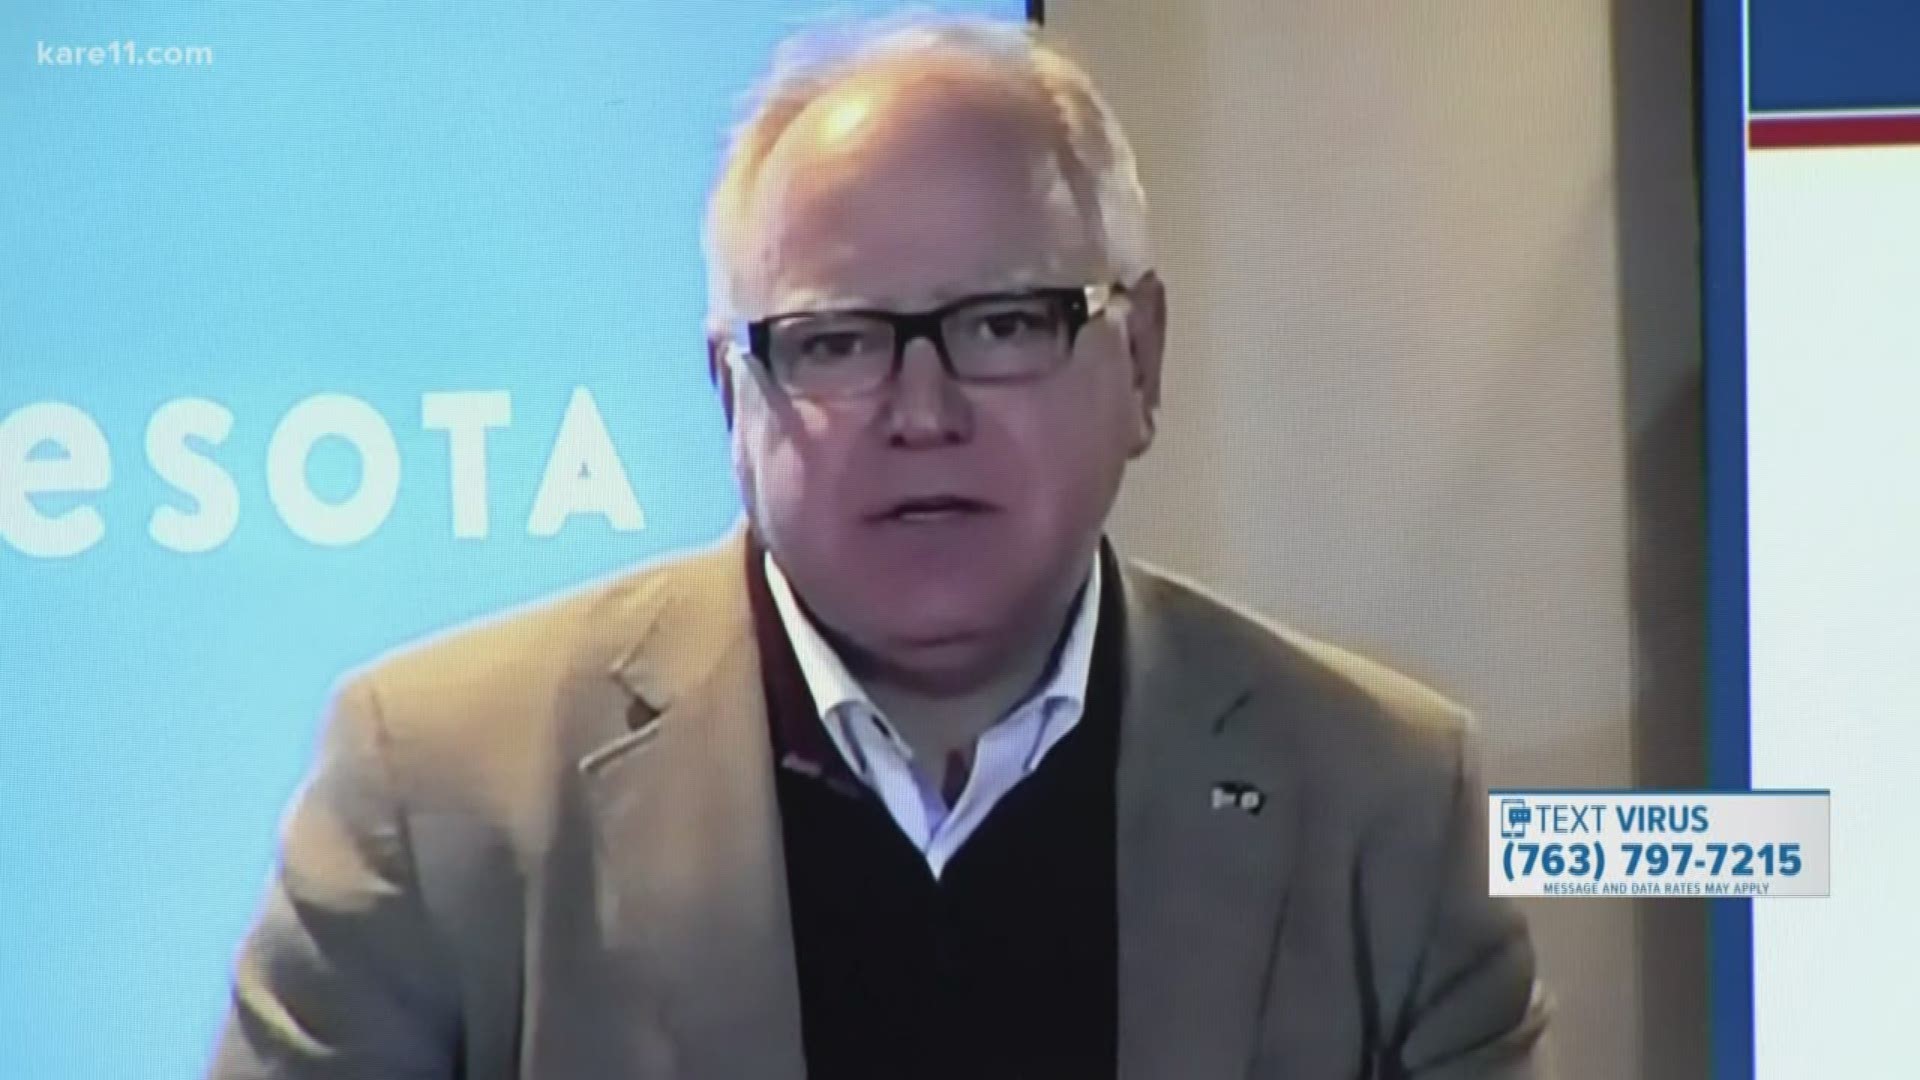 Gov. Tim Walz has ordered Minnesotans to stay at home for 2 weeks to slow the spread of the coronavirus and to stop it from overwhelming the health care system.